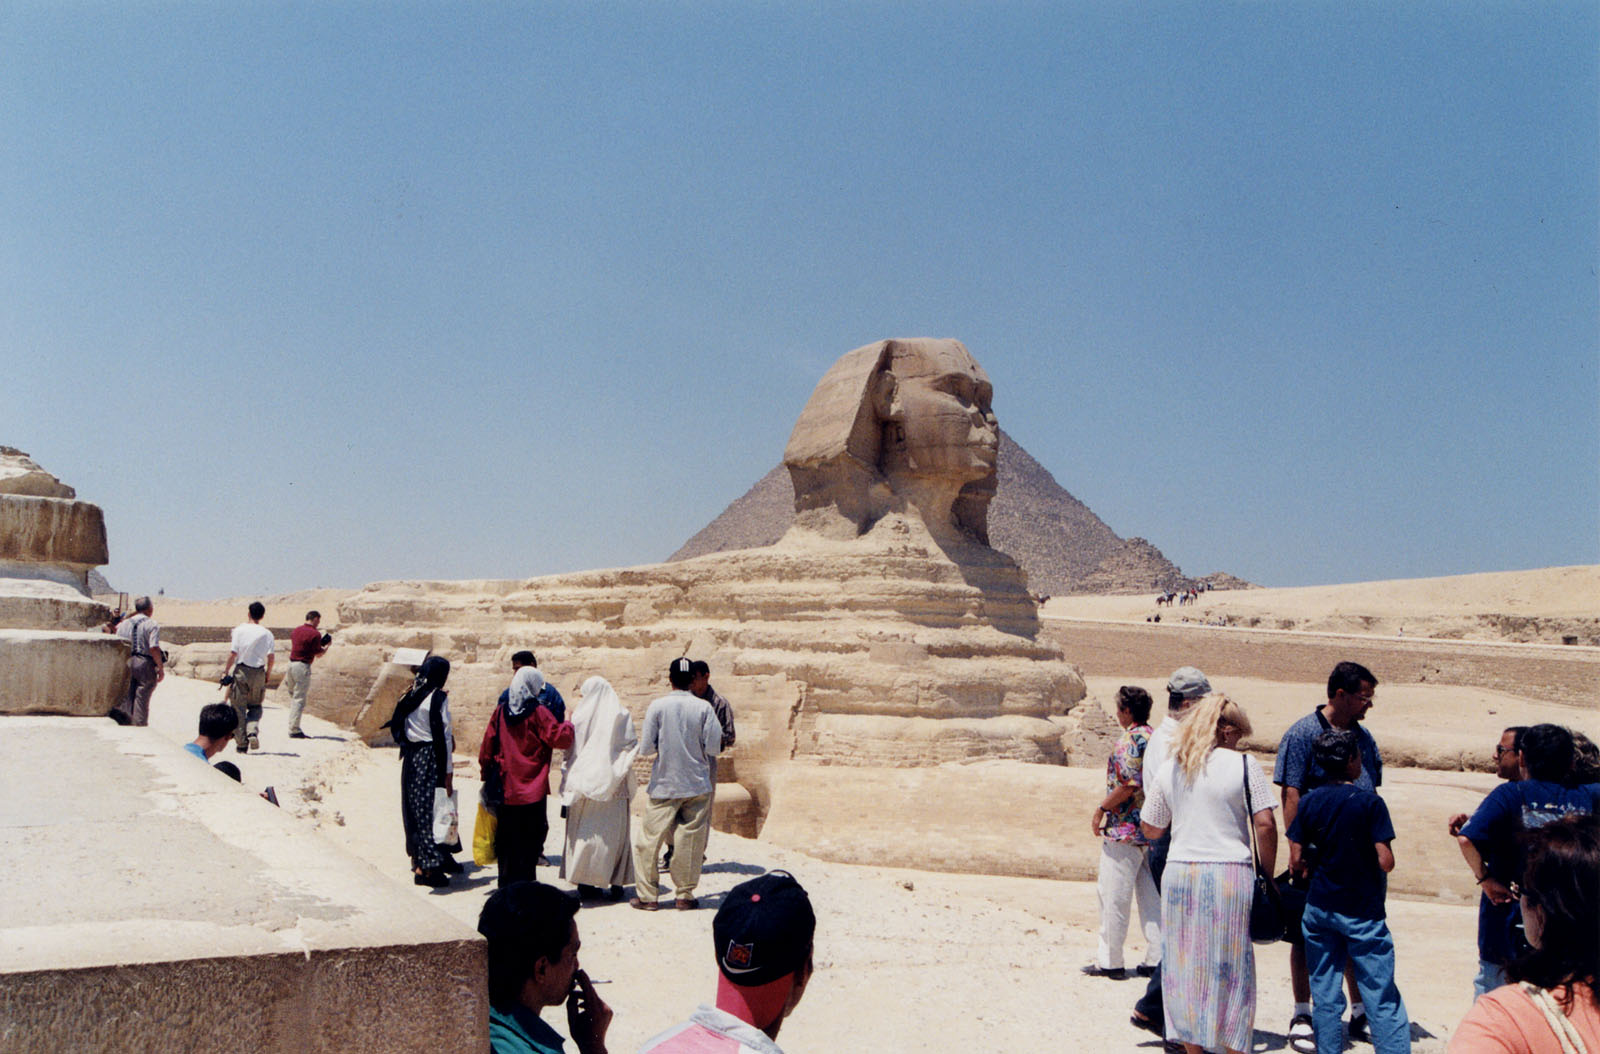 Color photo of the Sphinx from afar with a pyramid in the background and several visitors walking in the foreground